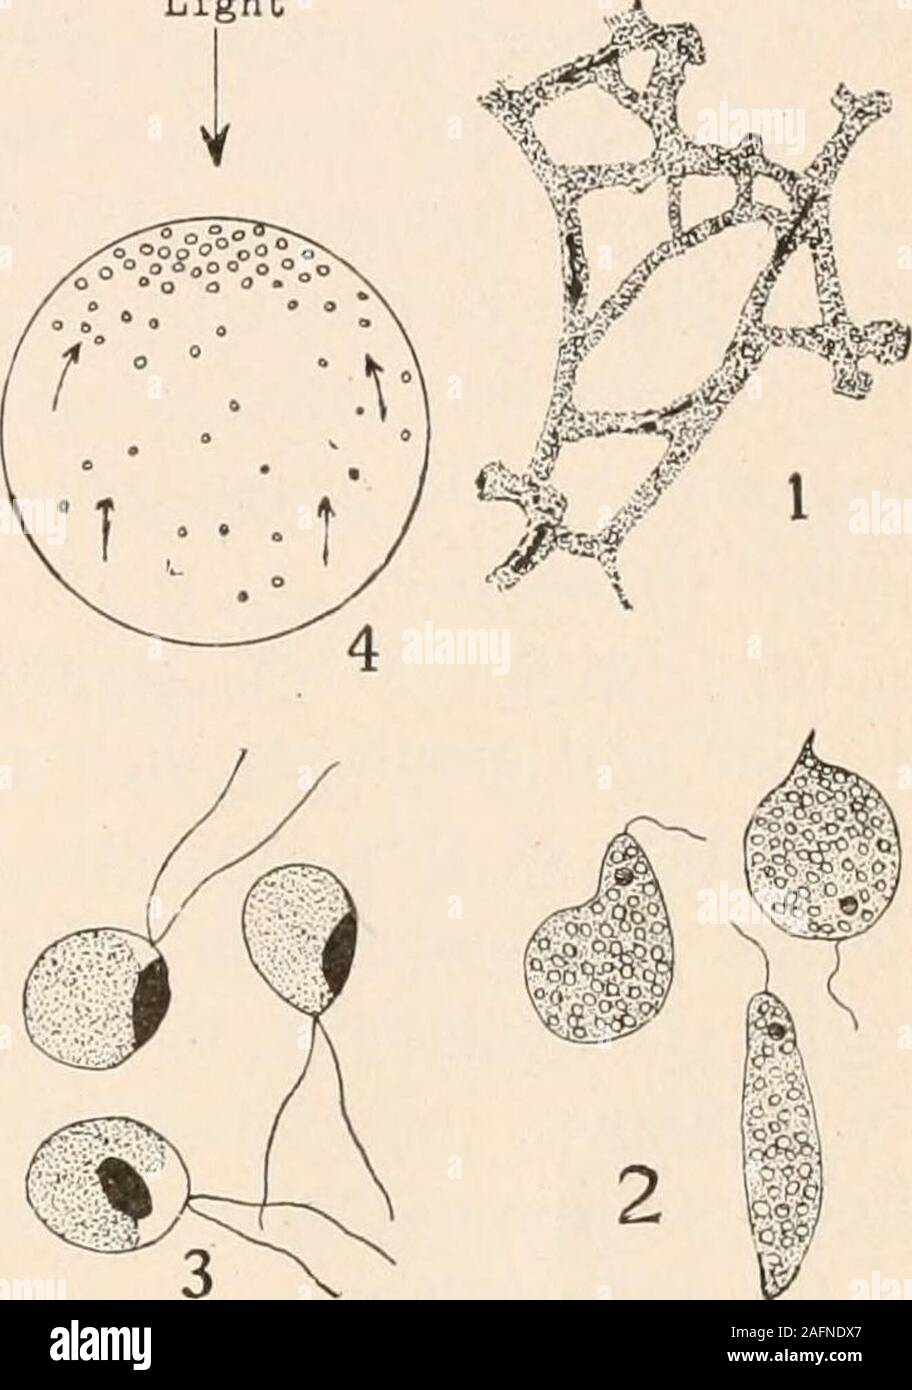 . Plant anatomy from the standpoint of the development and functions of the tissues, and handbook of micro-technic. expansion, resulting inmarked change of form inEuglena and plasmodia, and inthe thrashing back and forth ofthe cilia of swarm spores; andthe circulation and rotation ofthe cytoplasm spoken of above isprobably caused by contractionand expansion in its differentparts. The power of contractionand expansion is usually compre-hended in the term contractility. (/) Perception and Response.—The protoplast is capable of per-ceiving external stimuli and responding to them in a definite way Stock Photo